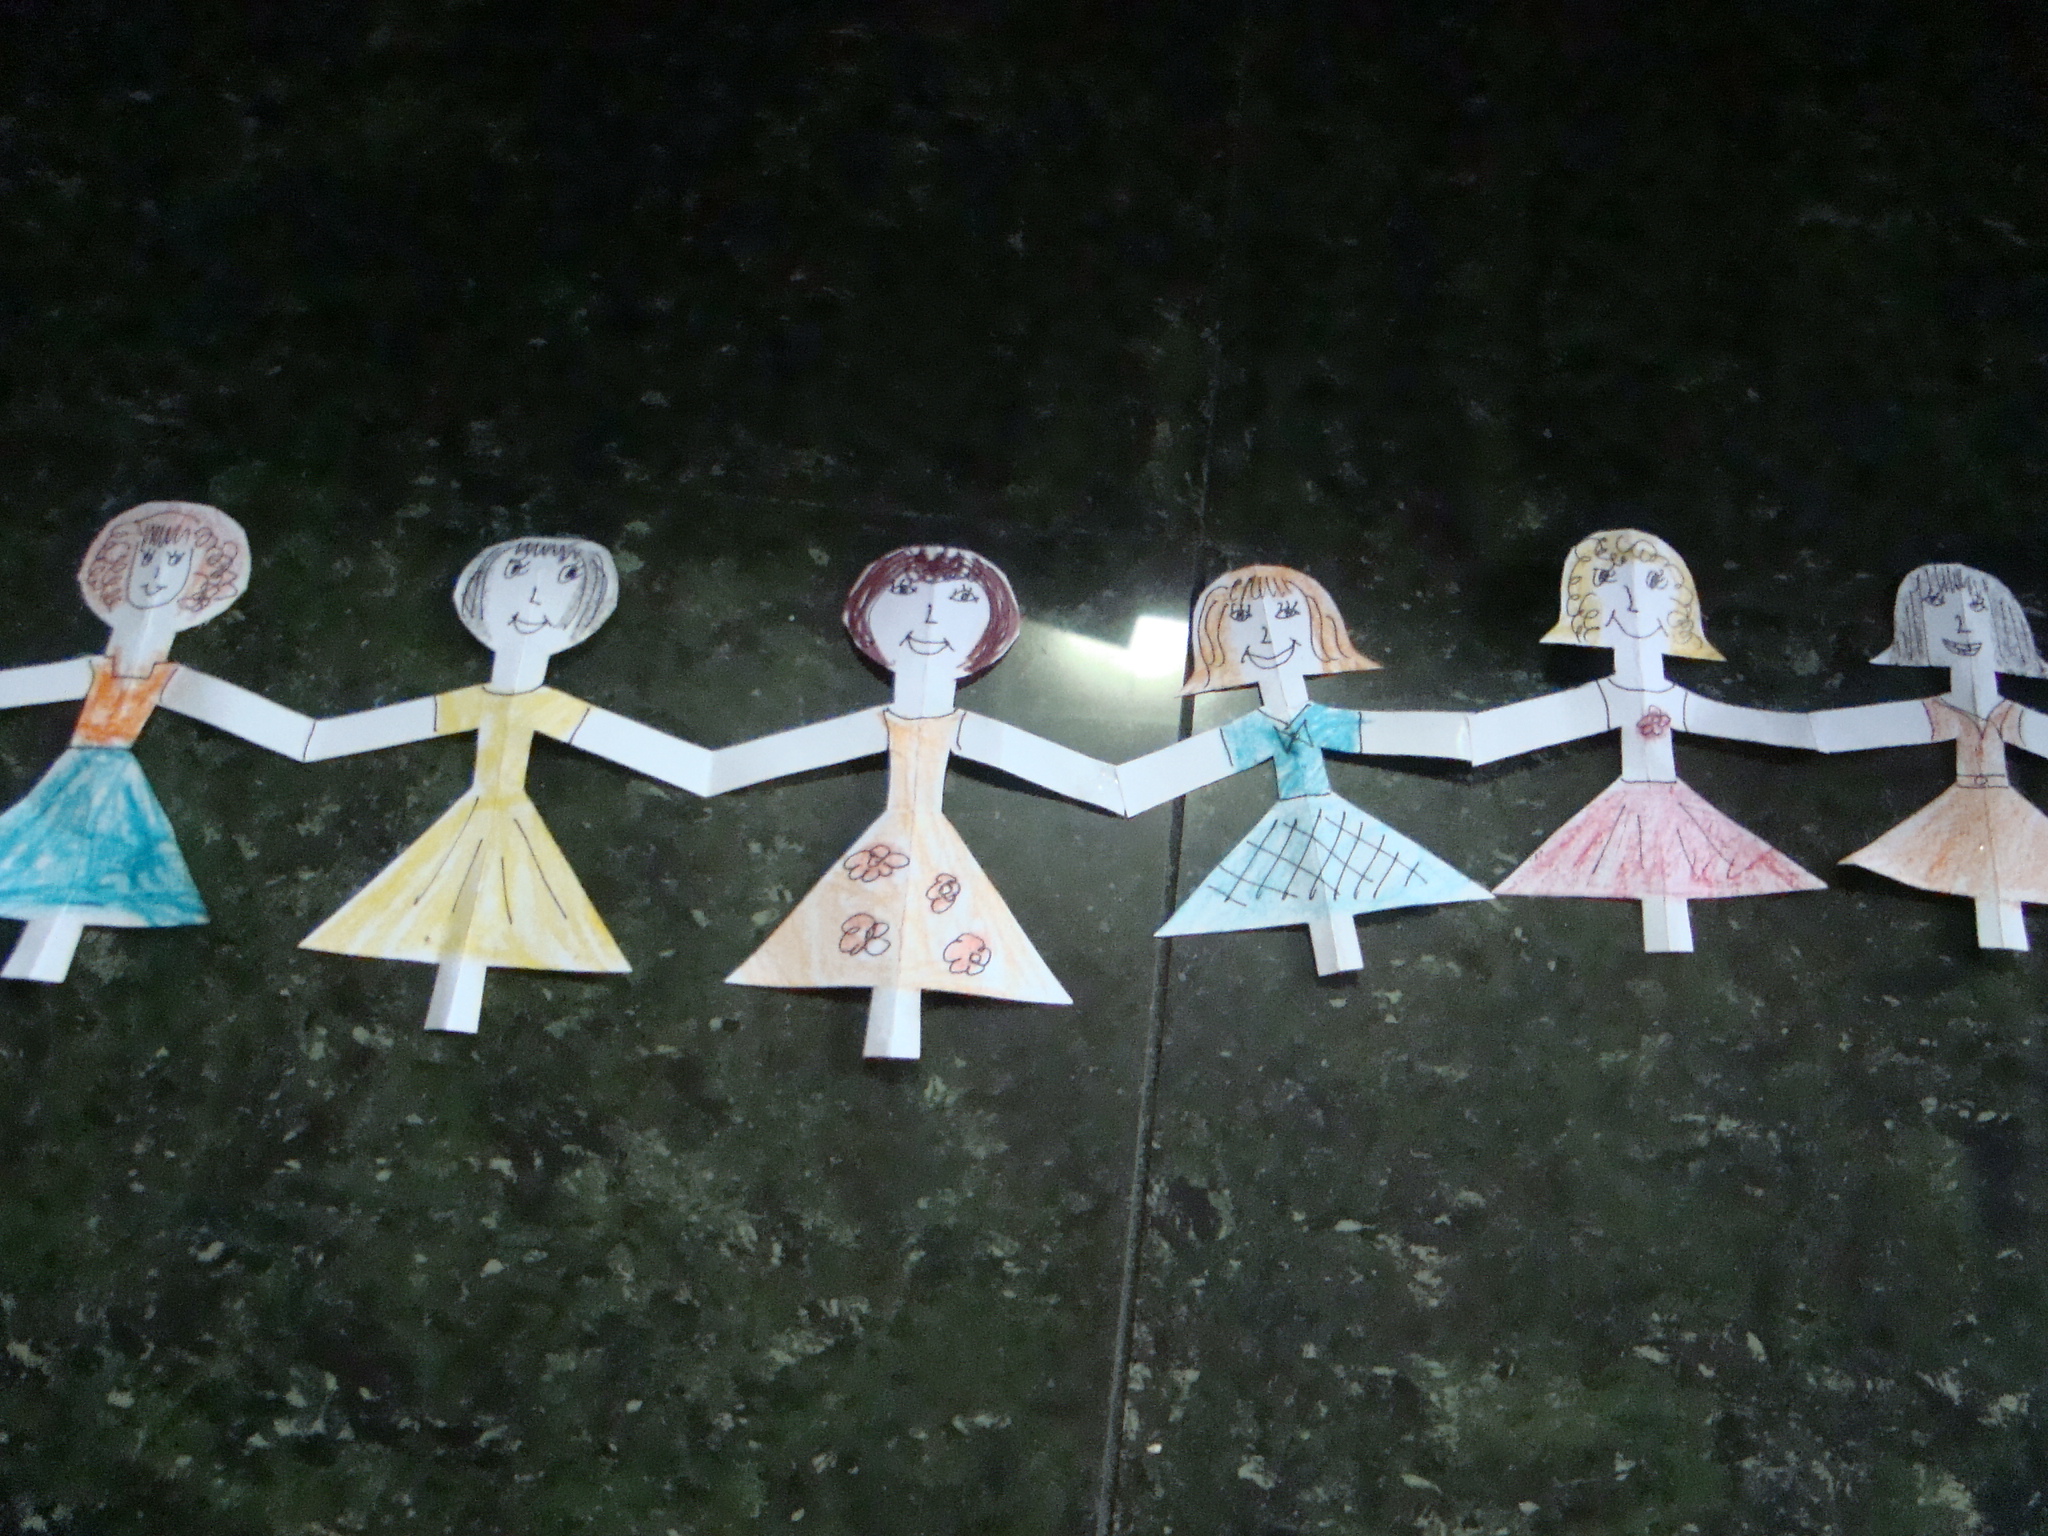 How To Make Paper Doll Chain Shop Sale, Save 56% | jlcatj.gob.mx